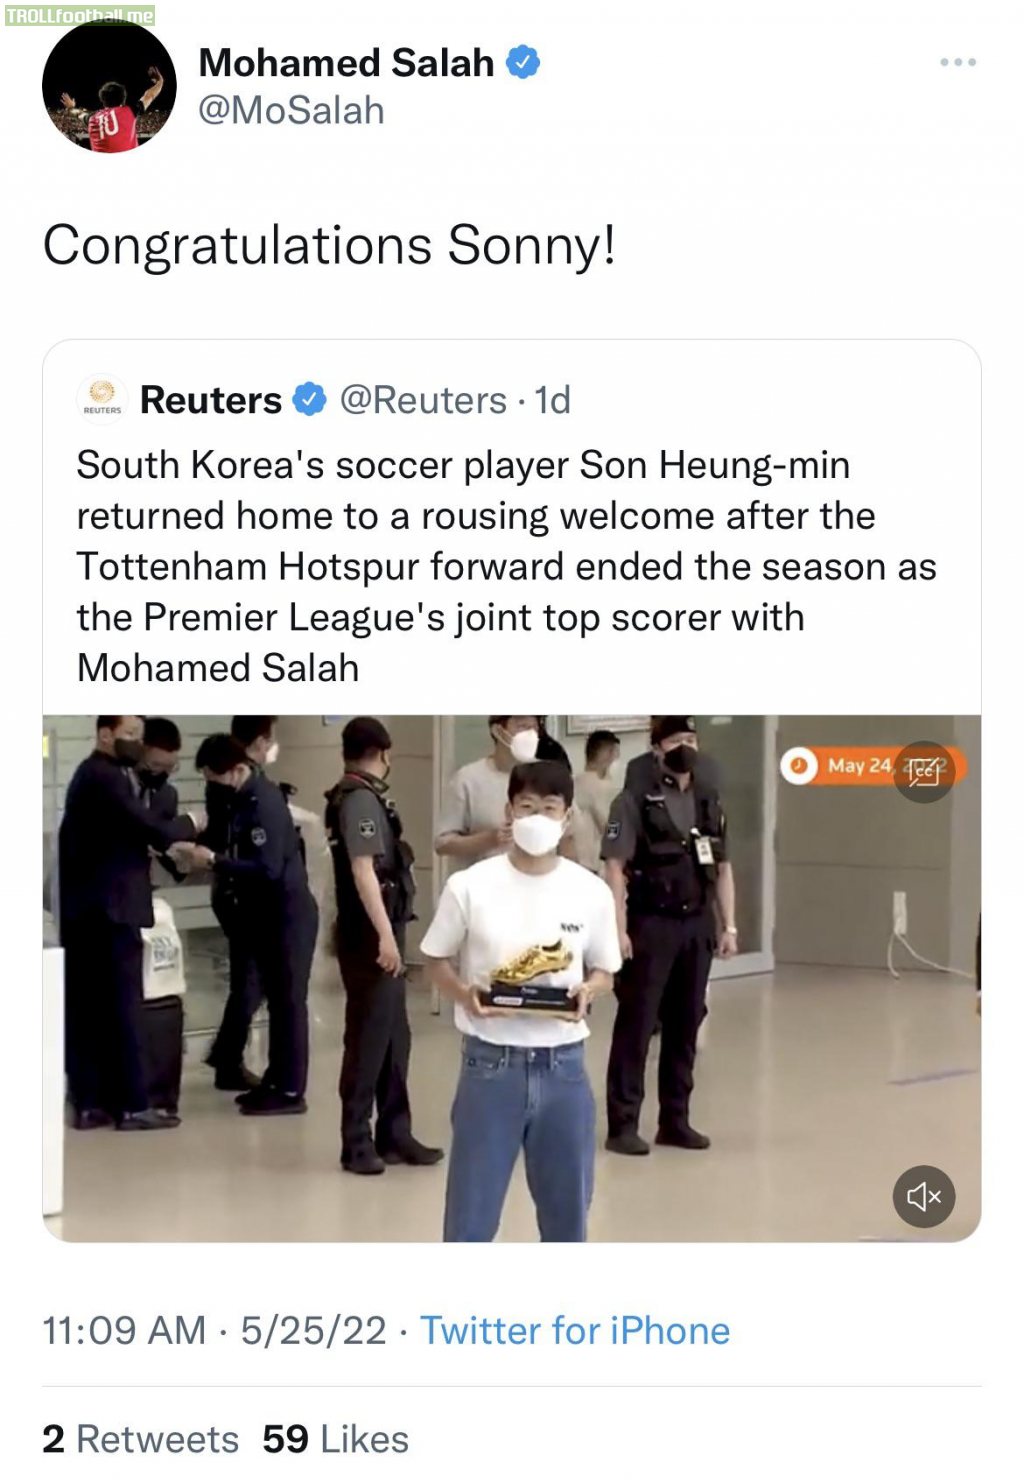 Salah congratulating Son Heung-Min after he ended up as the joint top scorer this season